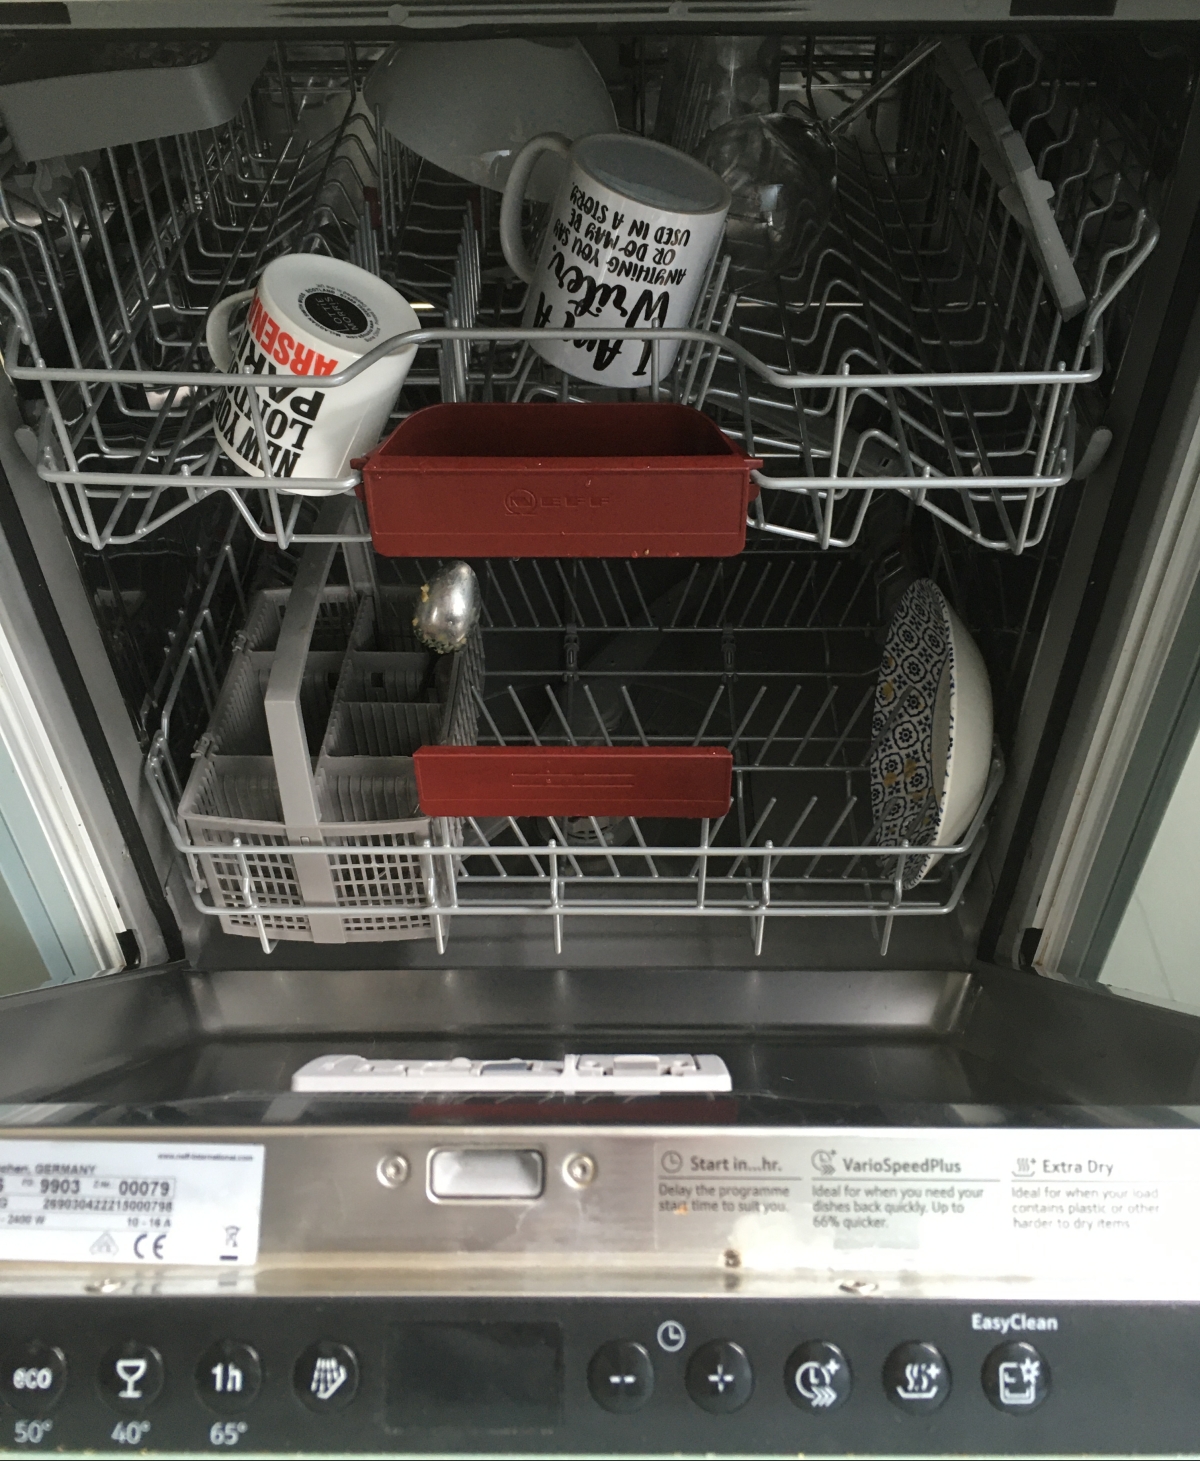 Every home needs two dishwashers